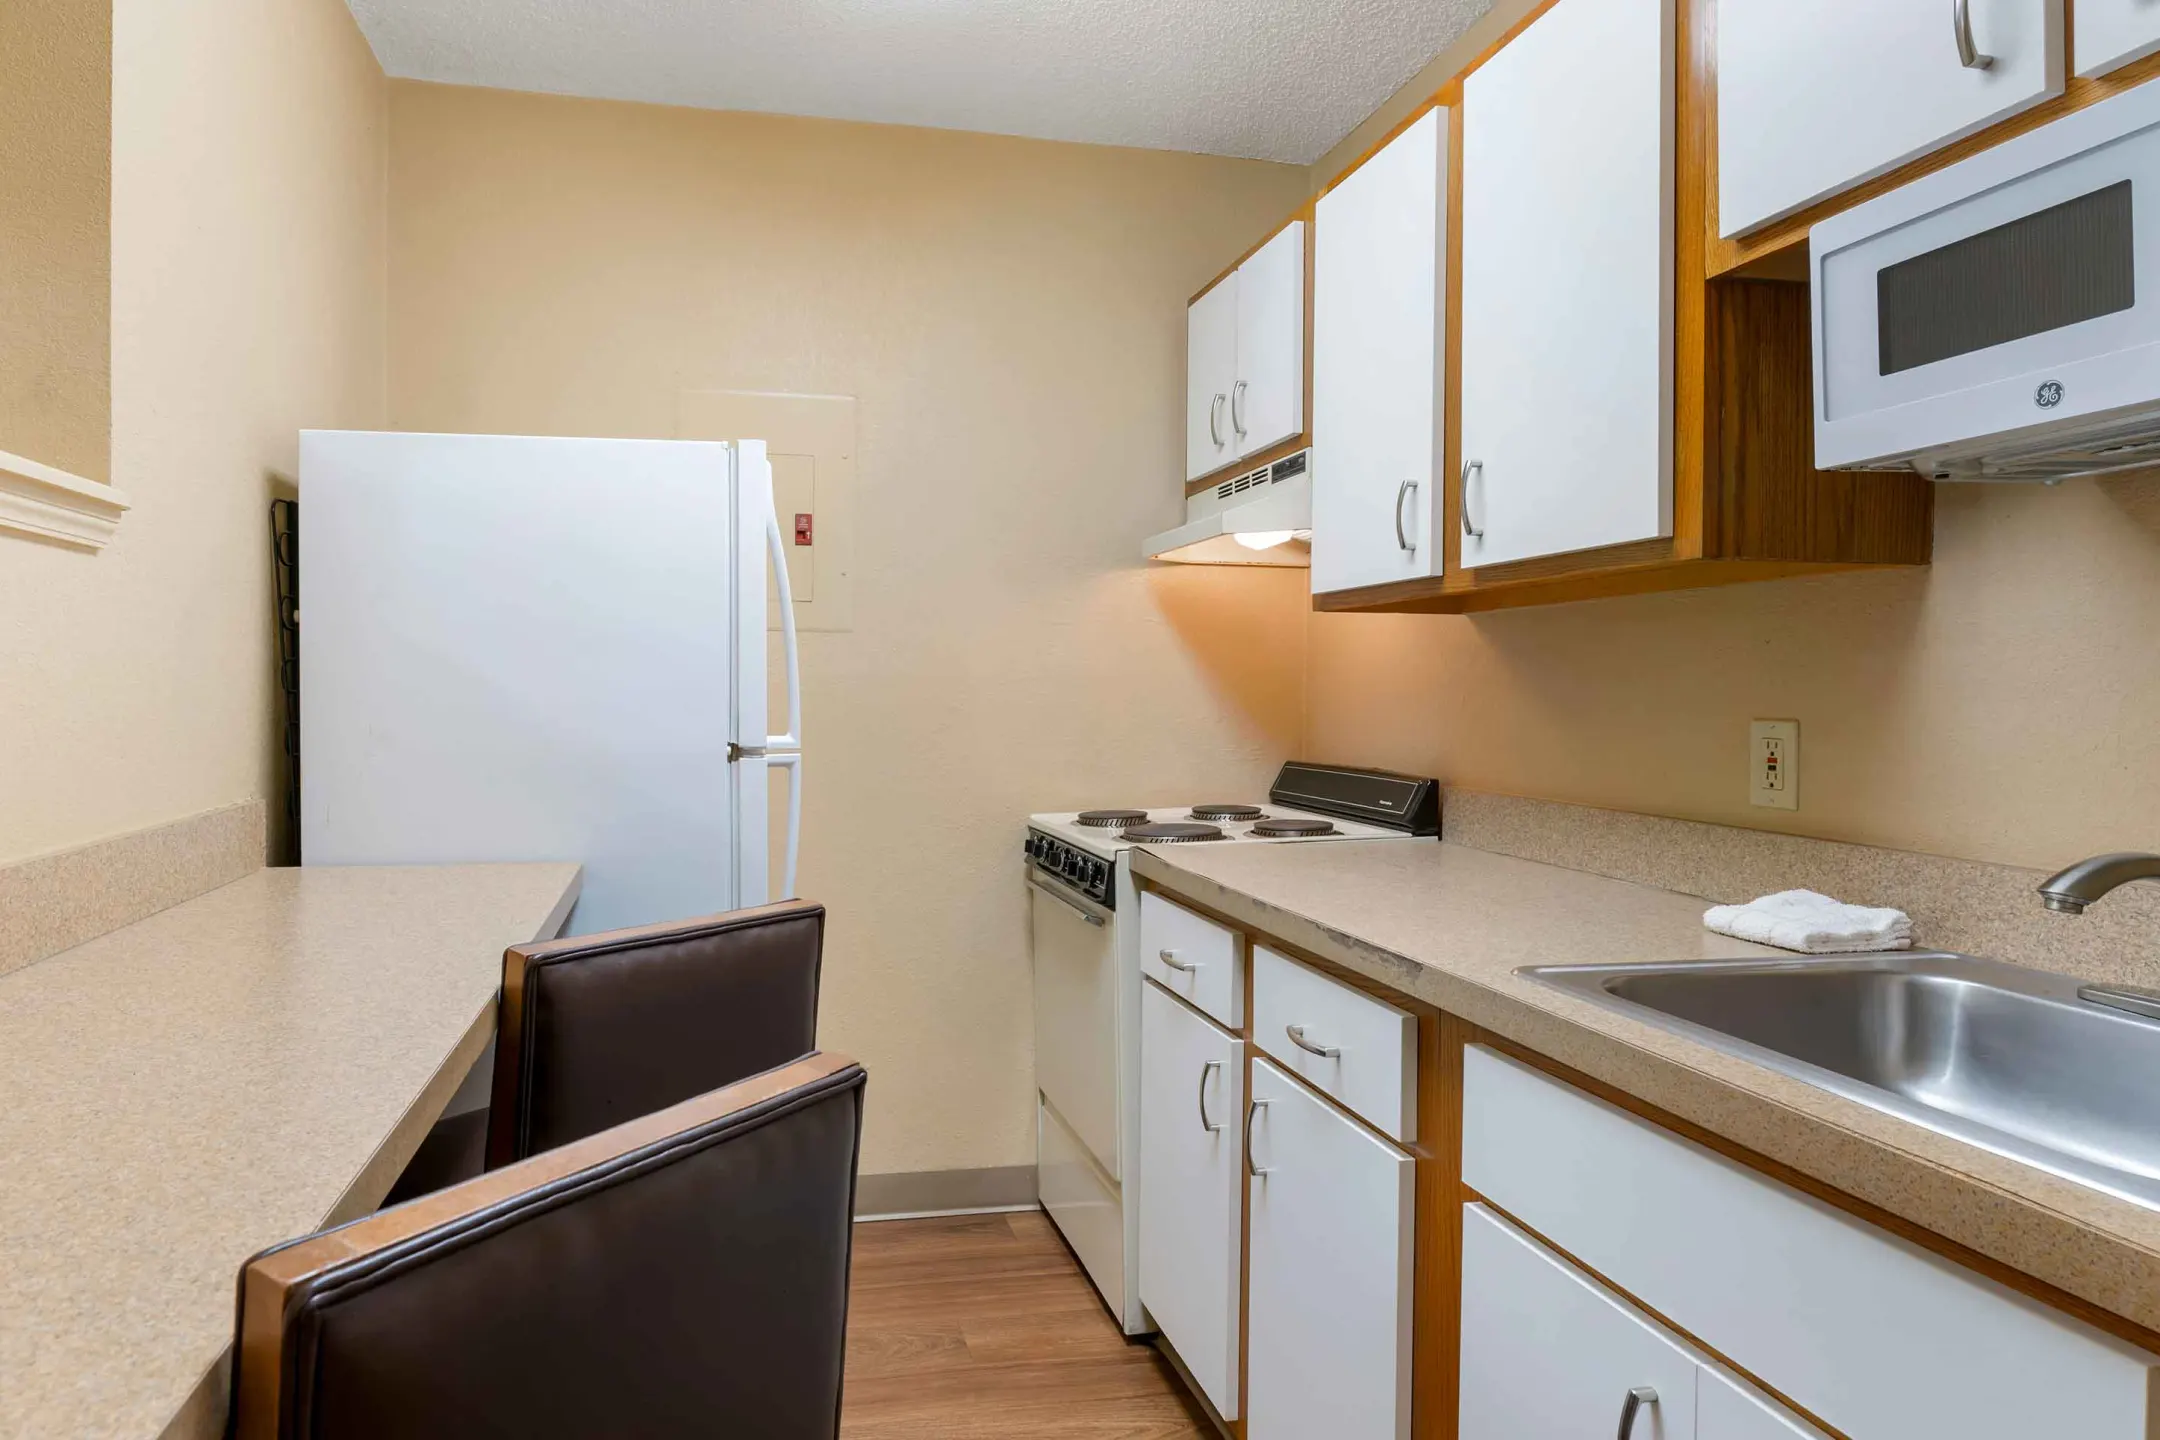 Kitchen - Furnished Studio - St. Louis - Earth City - Earth City, MO